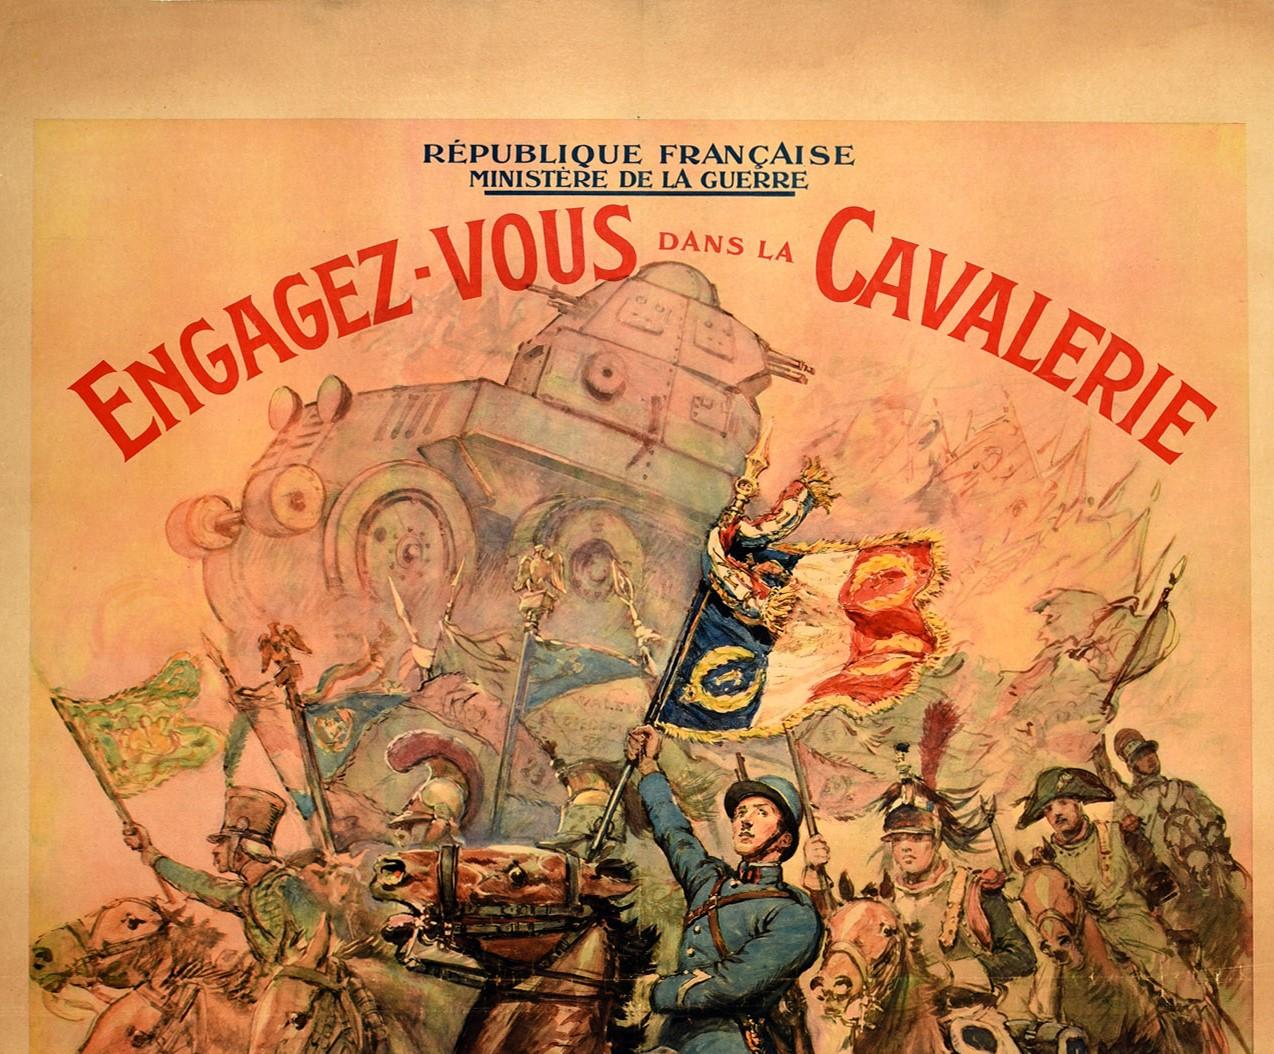 Original vintage French military recruitment poster encouraging men to join or rejoin the Cavalry - Engagez Vous Dans La Cavalerie. Colourful dynamic design by the French war correspondent and illustrator Georges Scott (1873-1943) featuring a modern